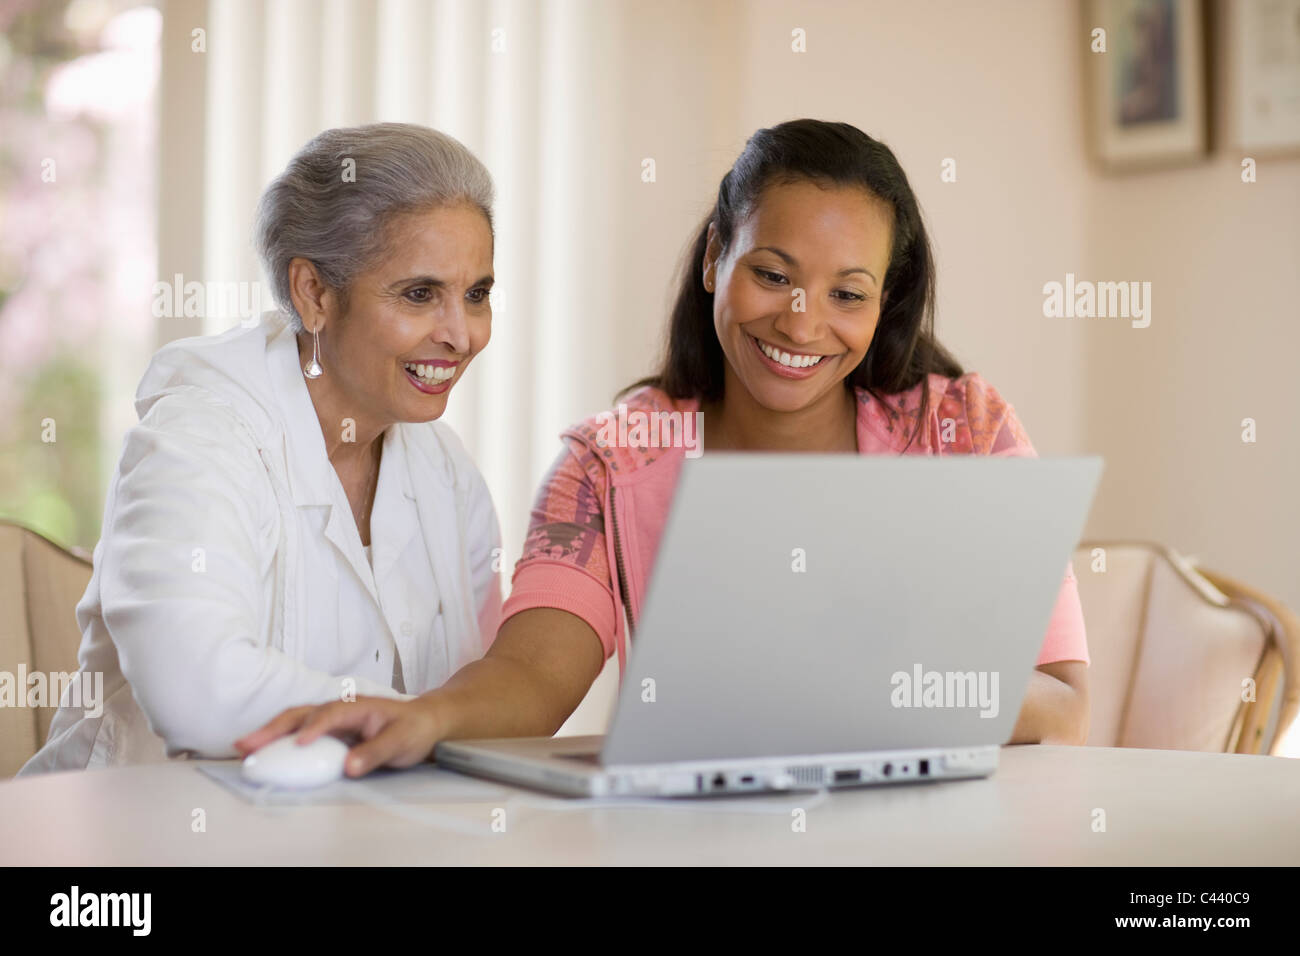 Attractive black mother and daughter using computer Stock Photo